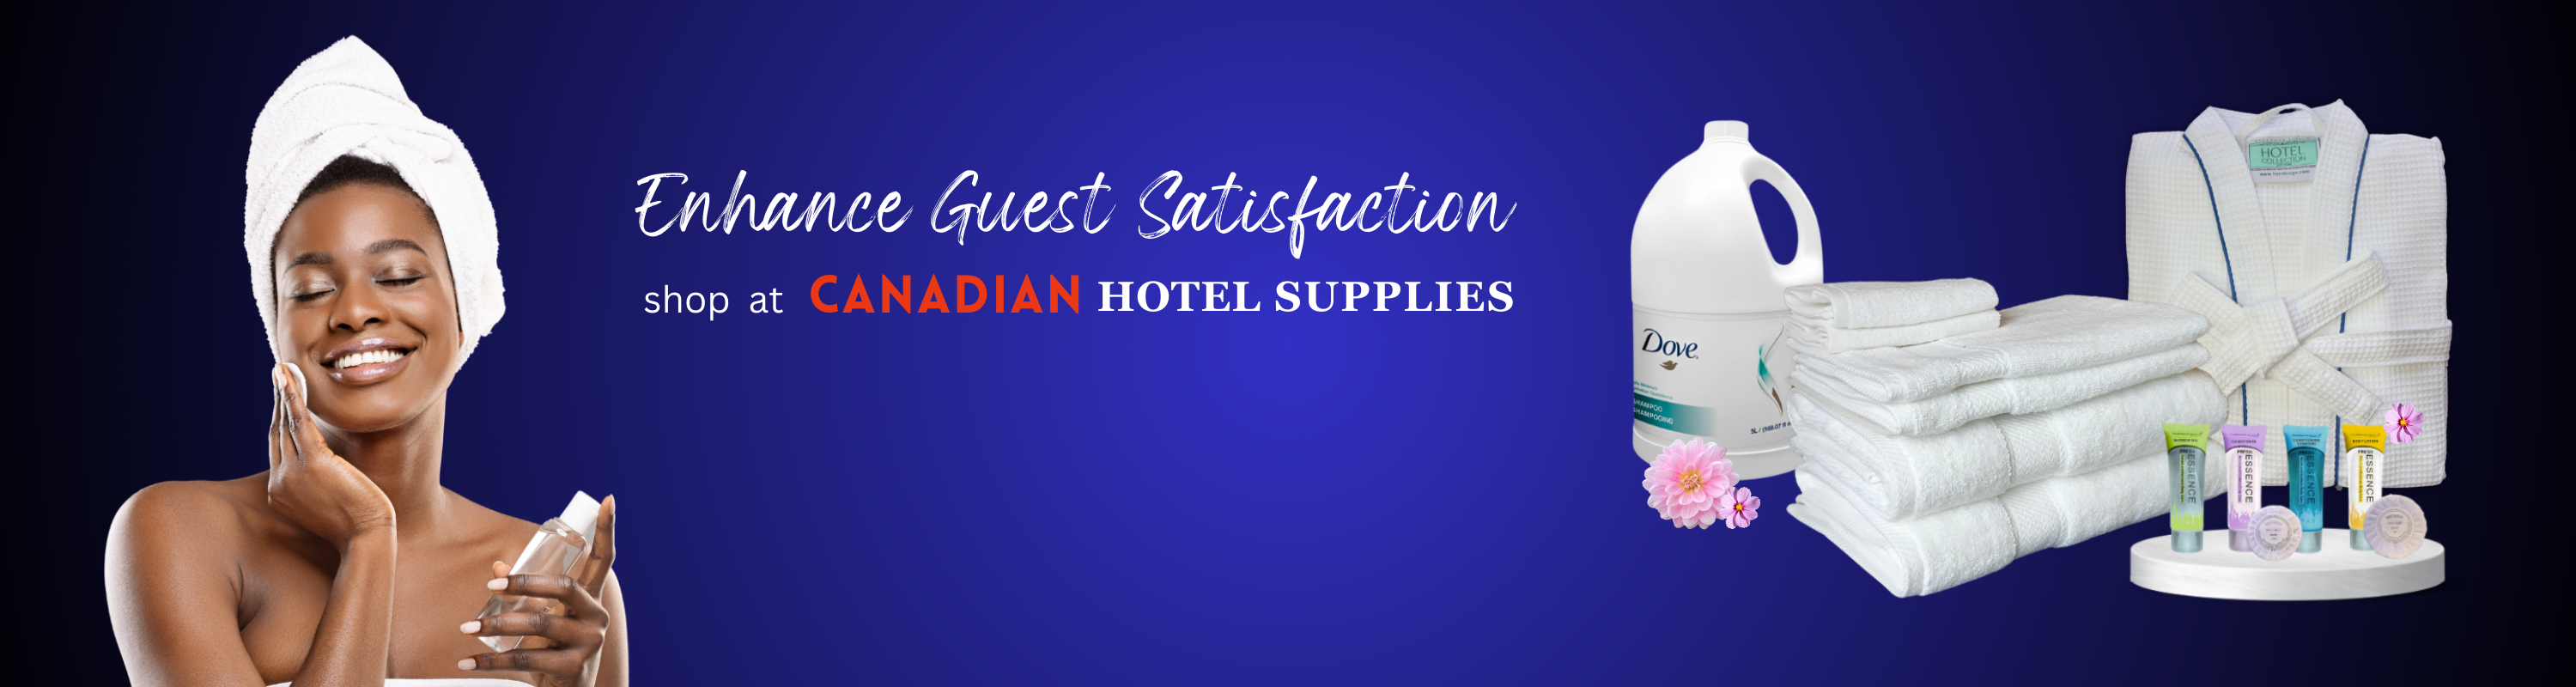 Enhance guest satisfaction. Shop at Canadian Hotel Supplies